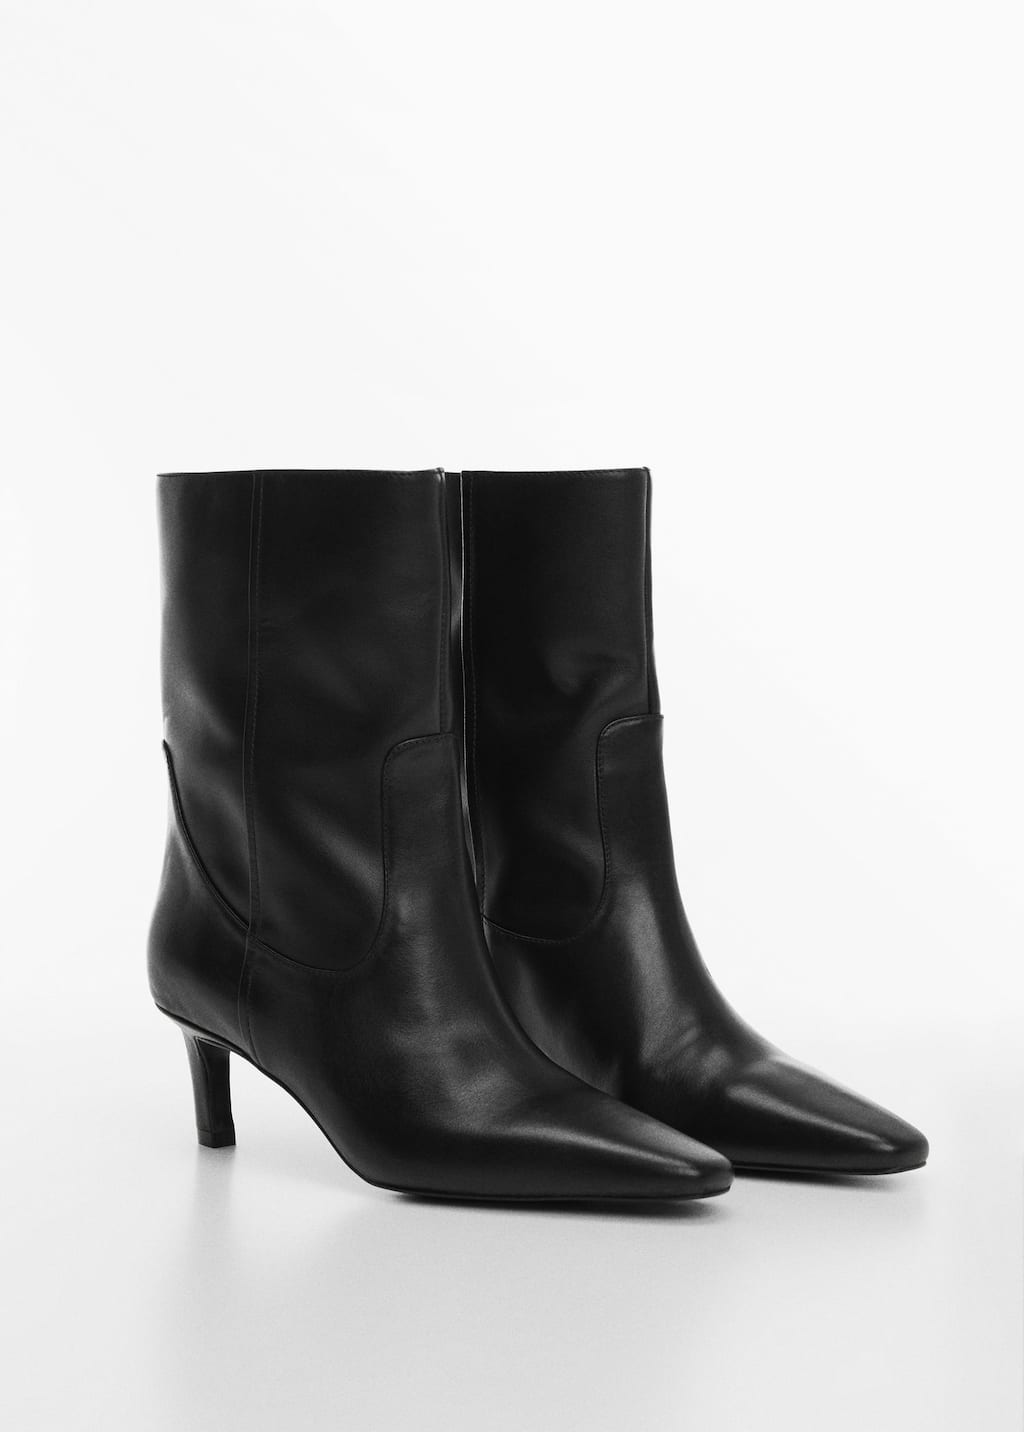 Leather Boots With Kitten Heels - Women